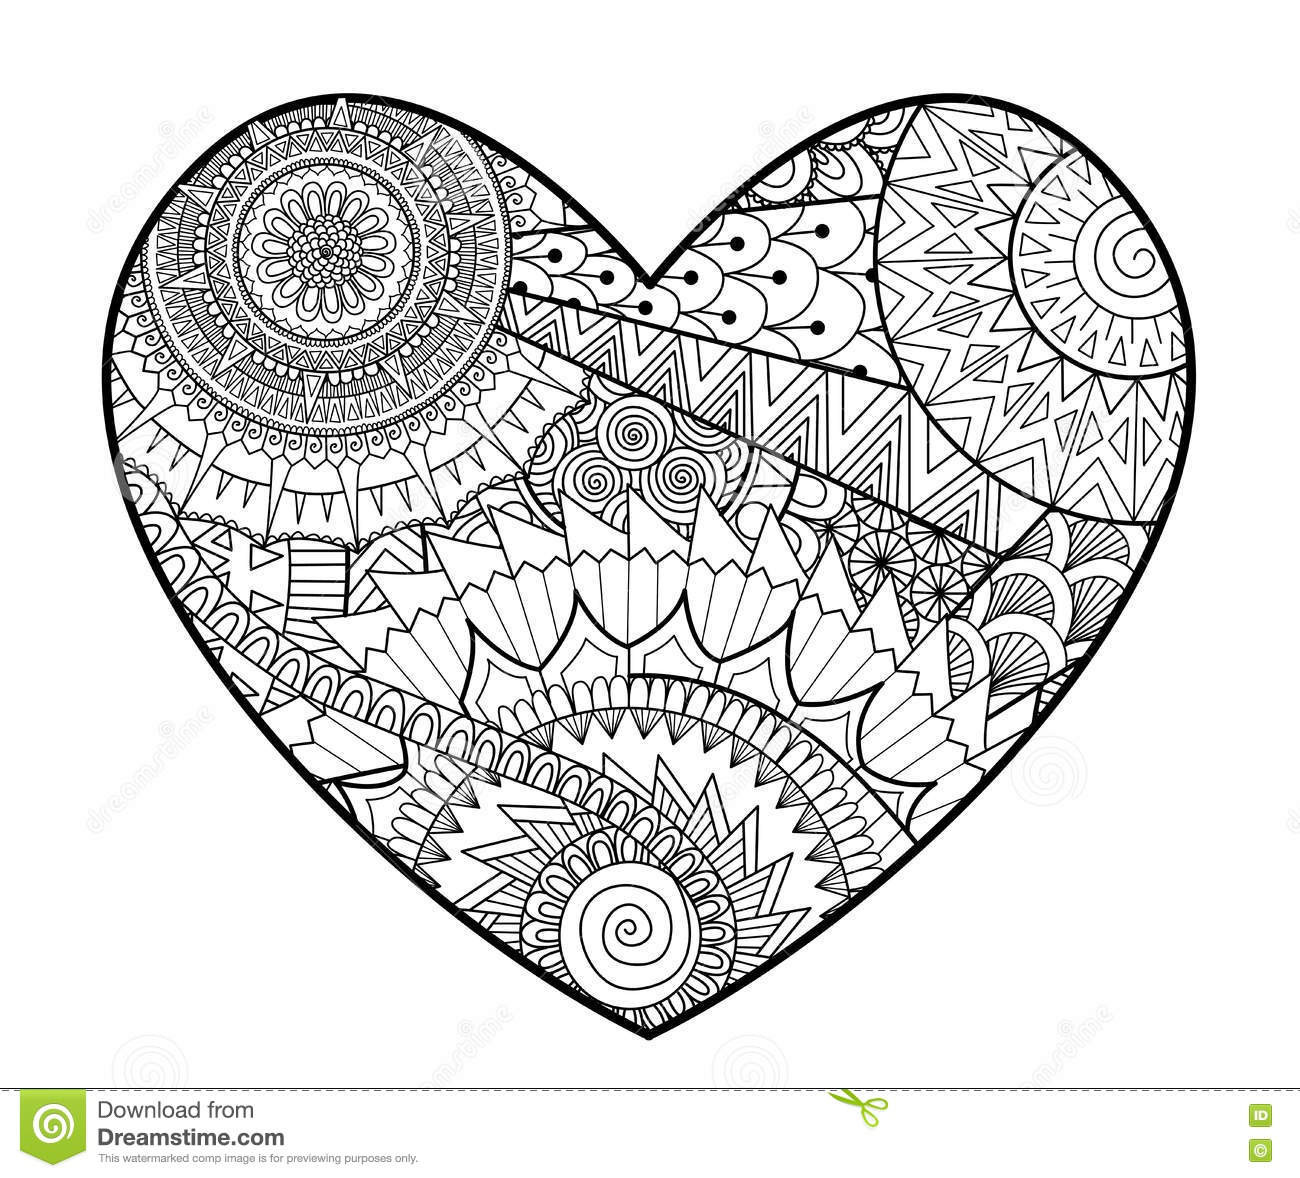 Heart Coloring Pages For Adults
 Zendoodle In Heart Shape For Coloring Books For Adult